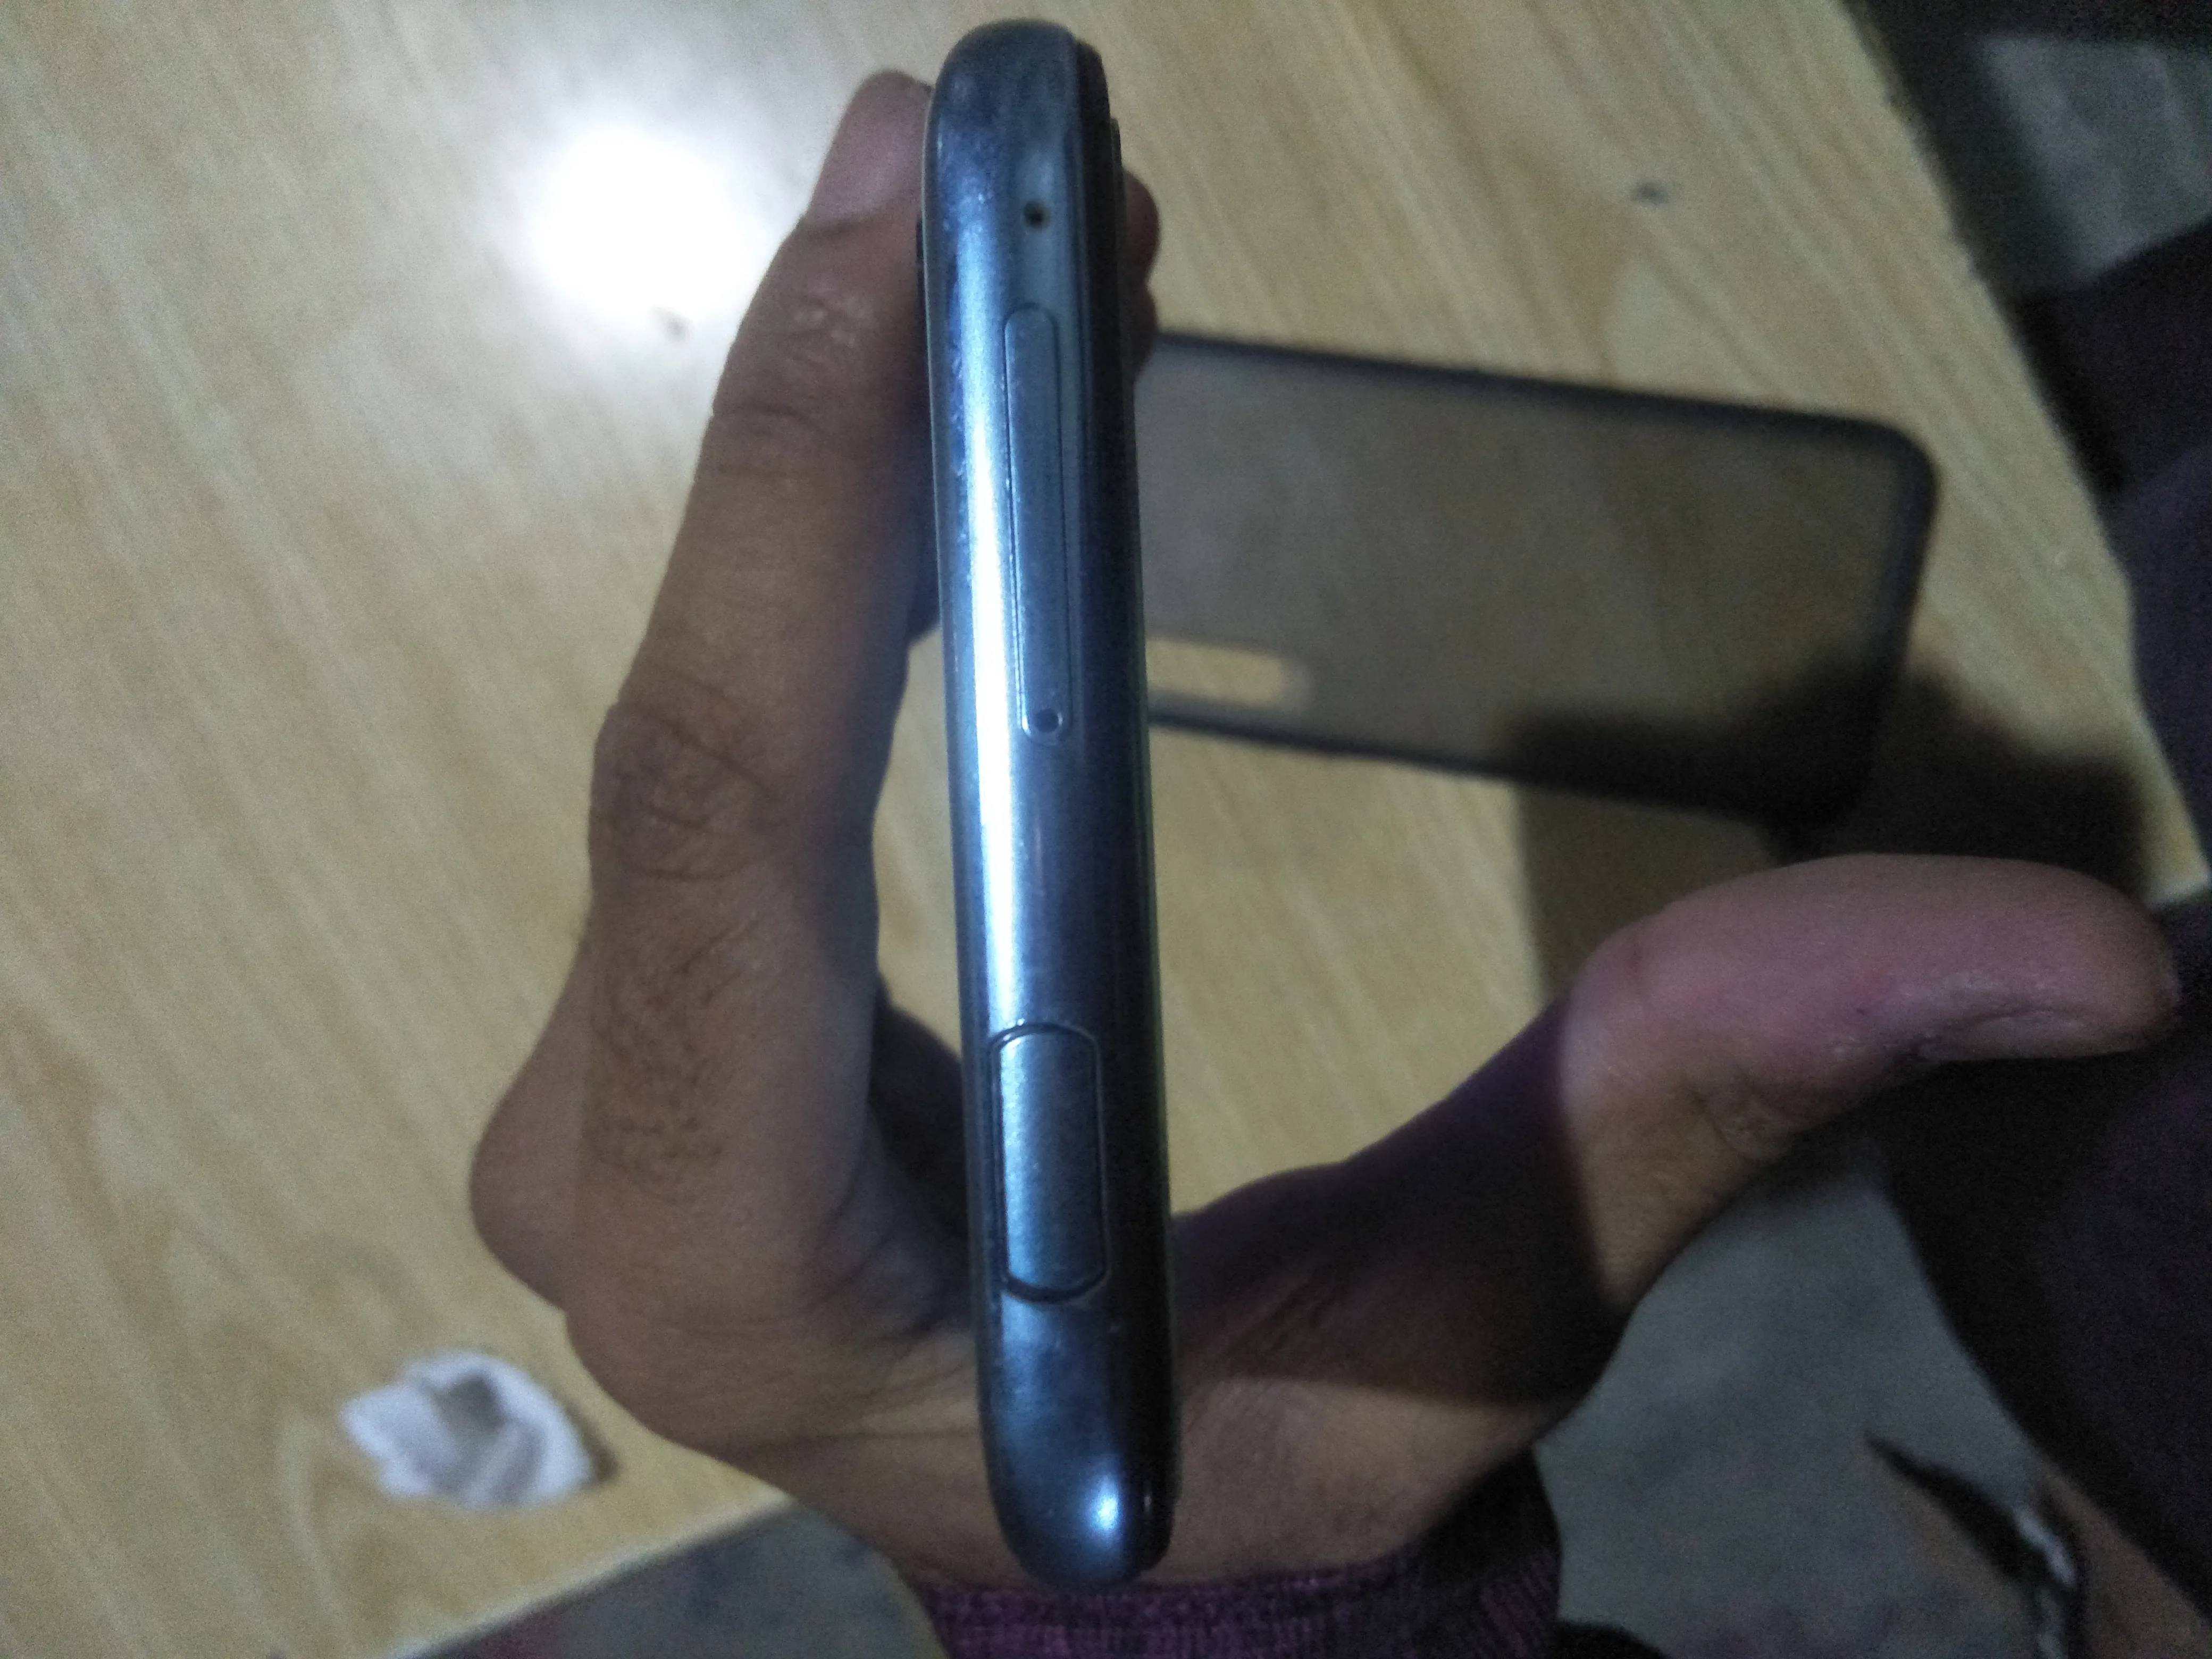 Huawei Y9s 6GB 128GB popup camera for sale - photo 2